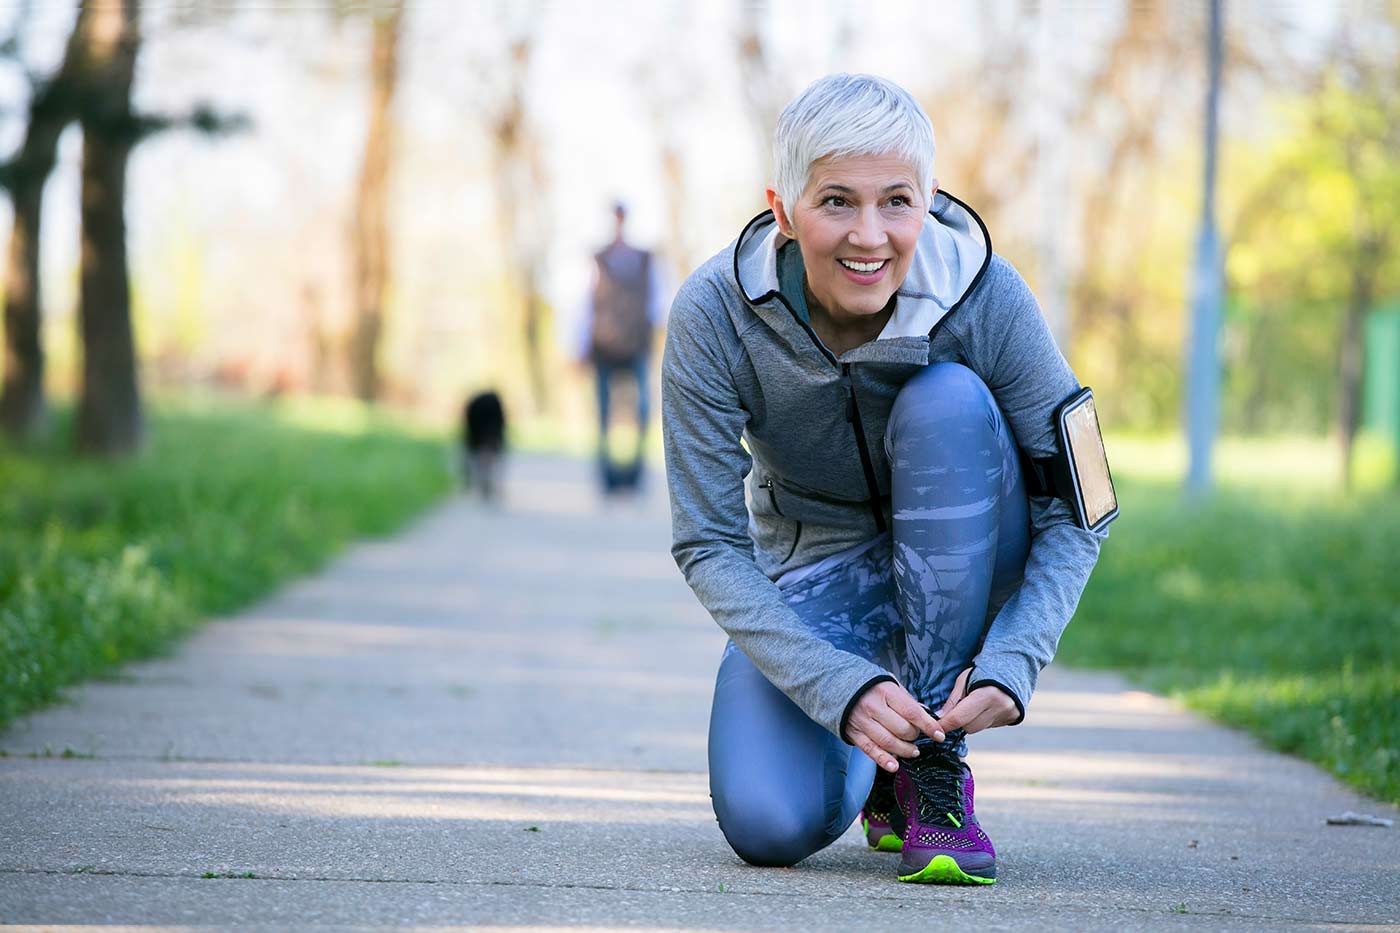 A senior woman wearing Beltone Ally Hearing Aids on a run and tying her shoes